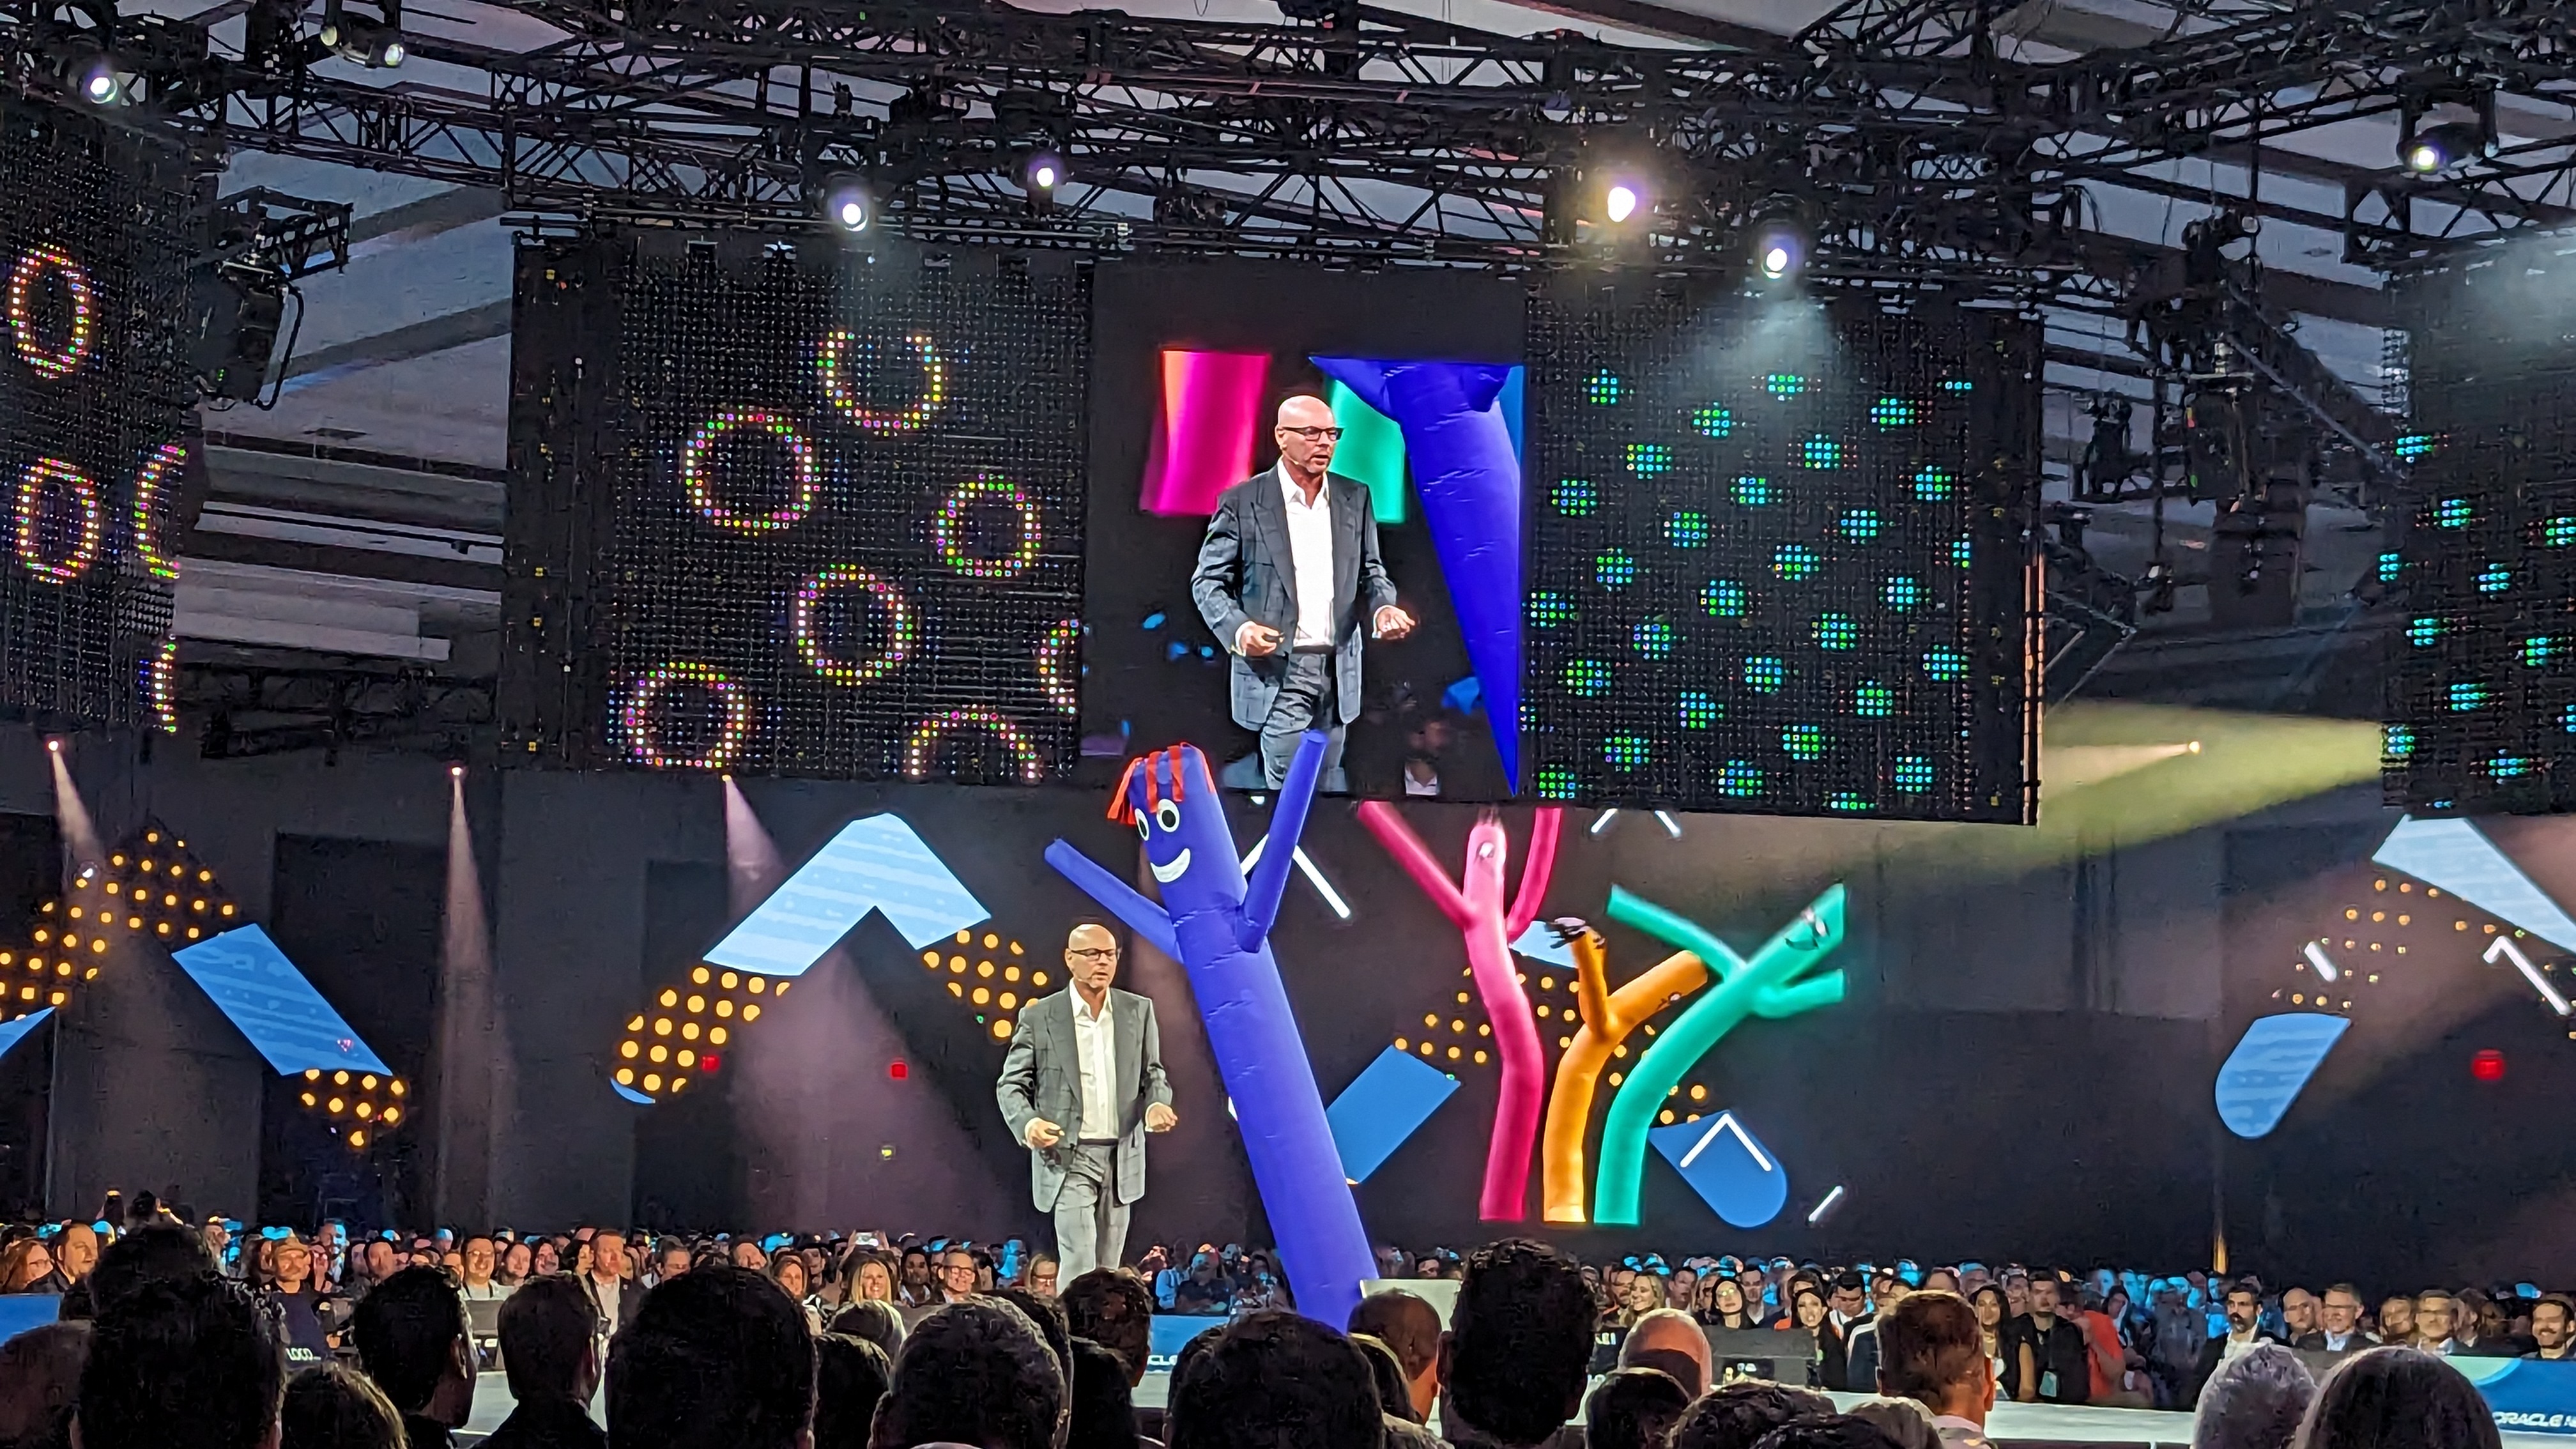 A wacky waving inflatable arm man onstage at SuiteWorld 2023.